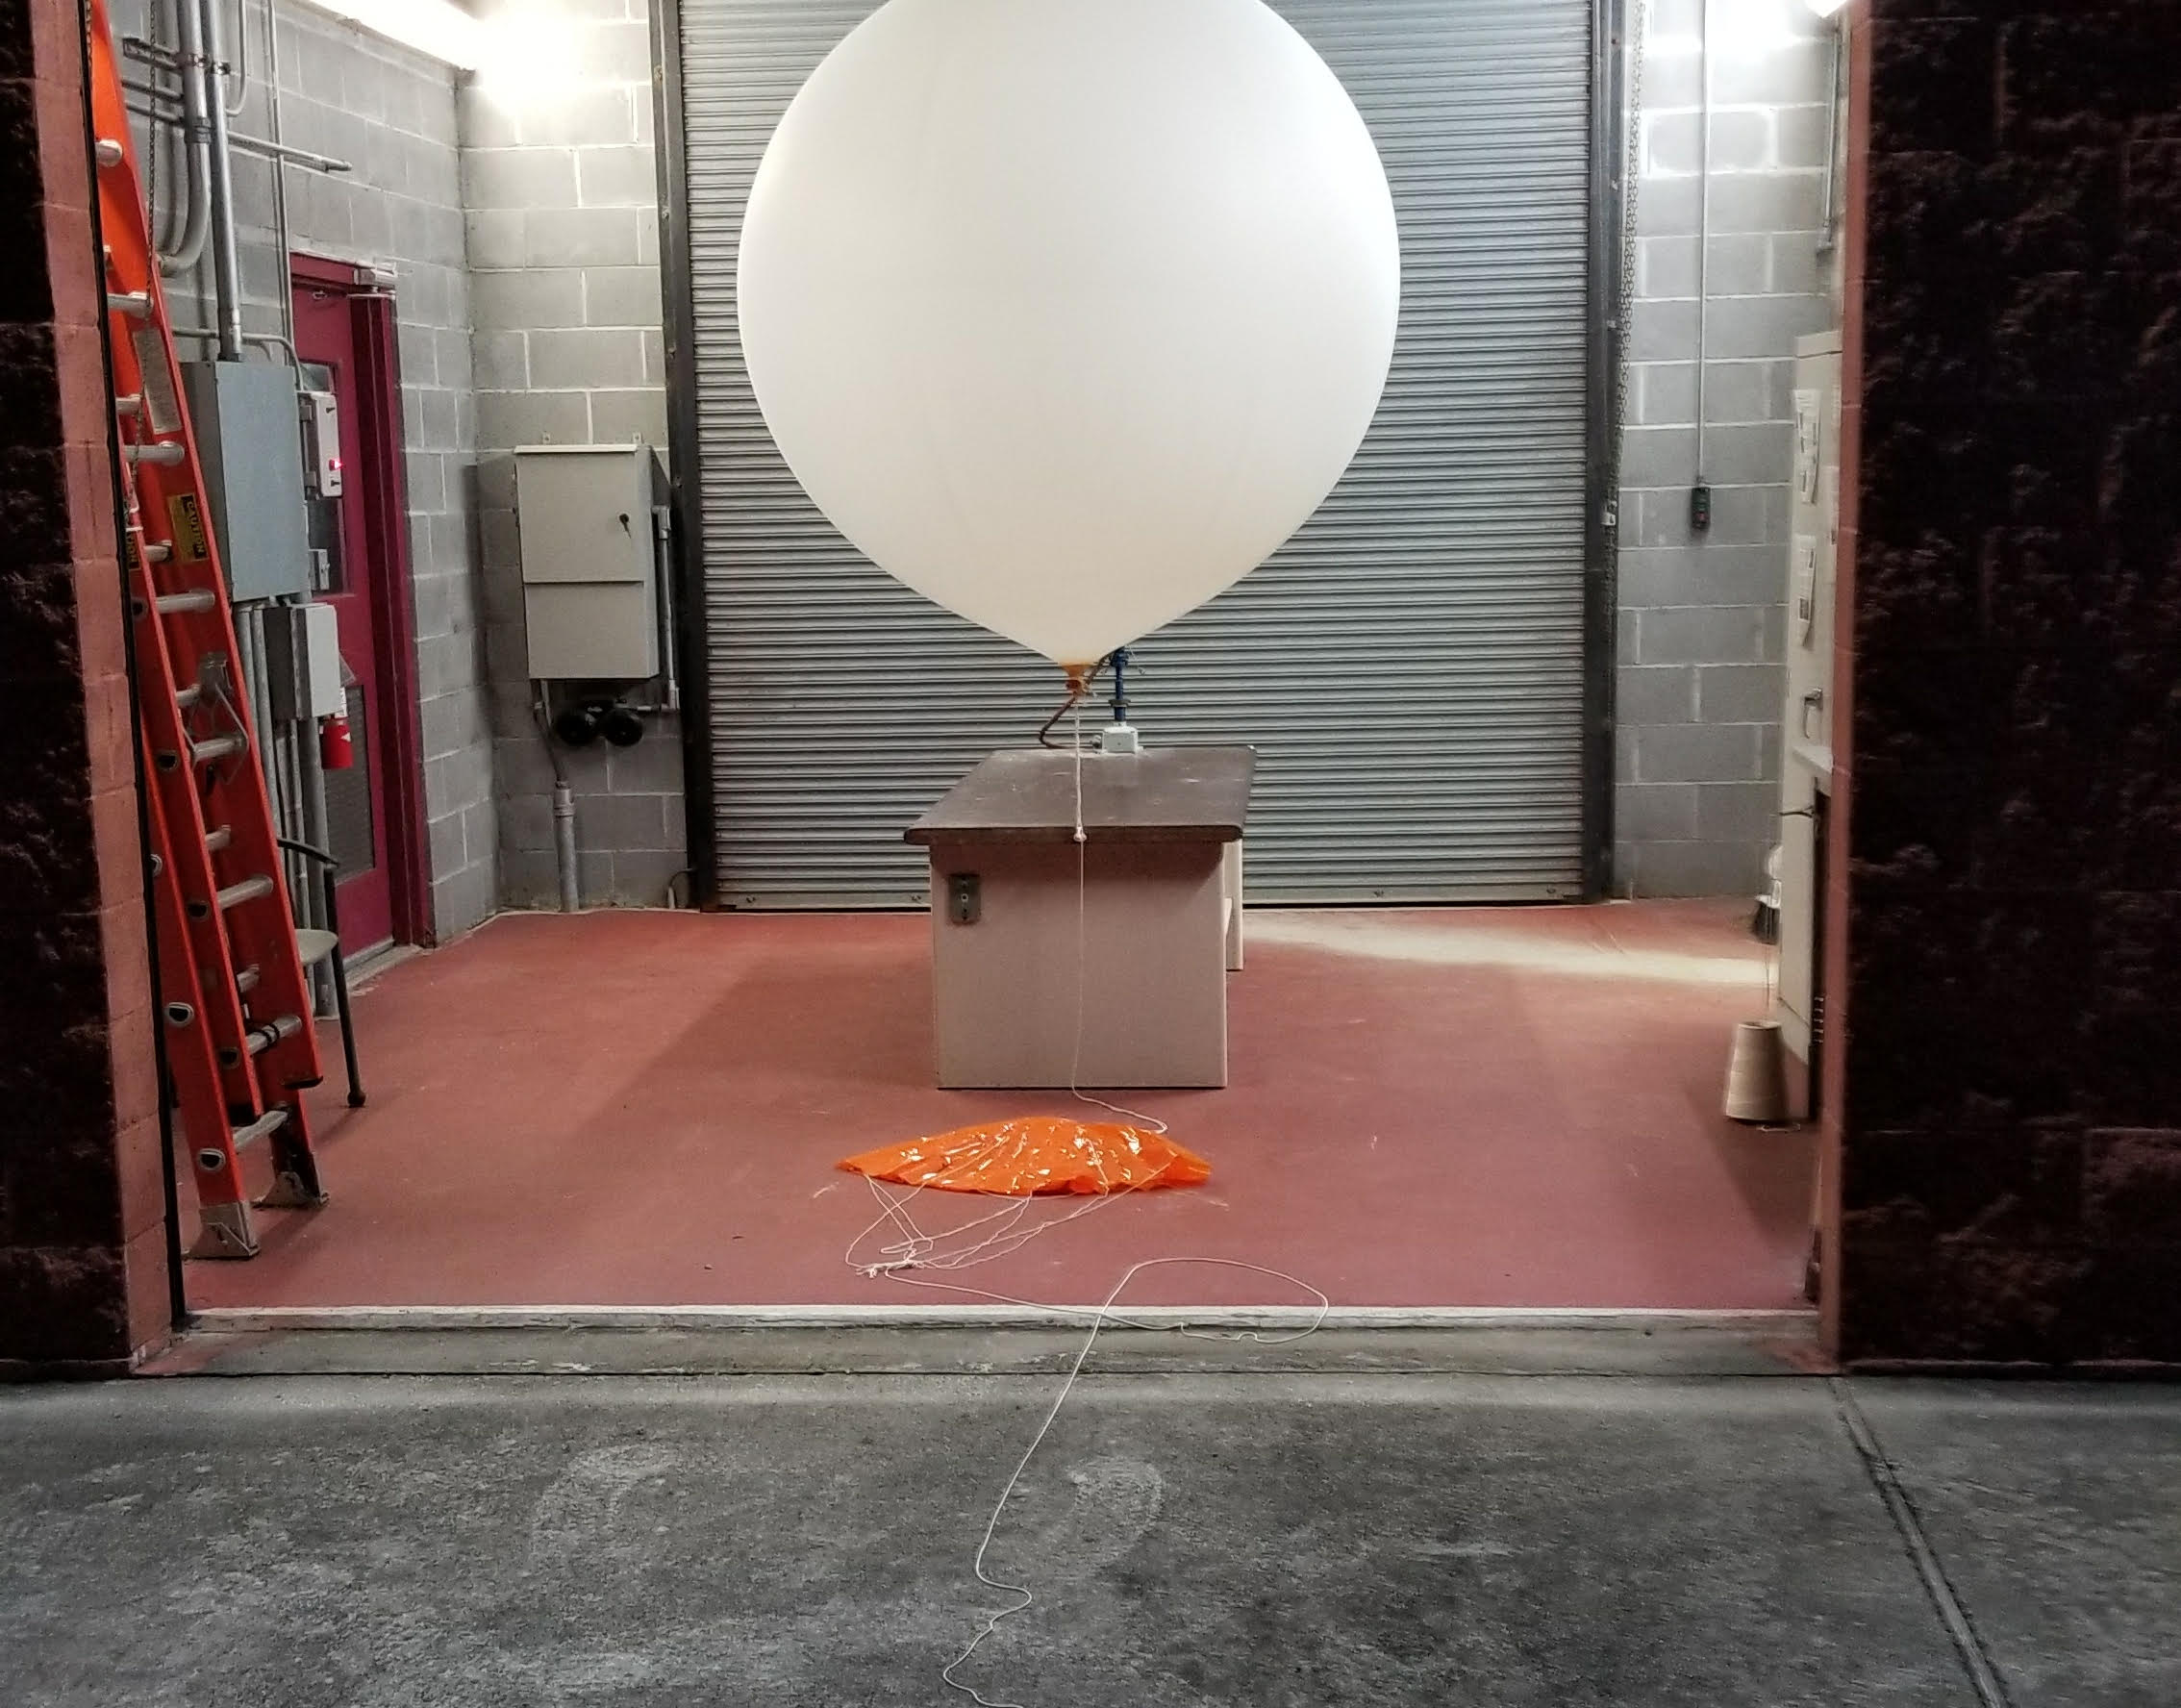 Weather balloon being prepared for flight